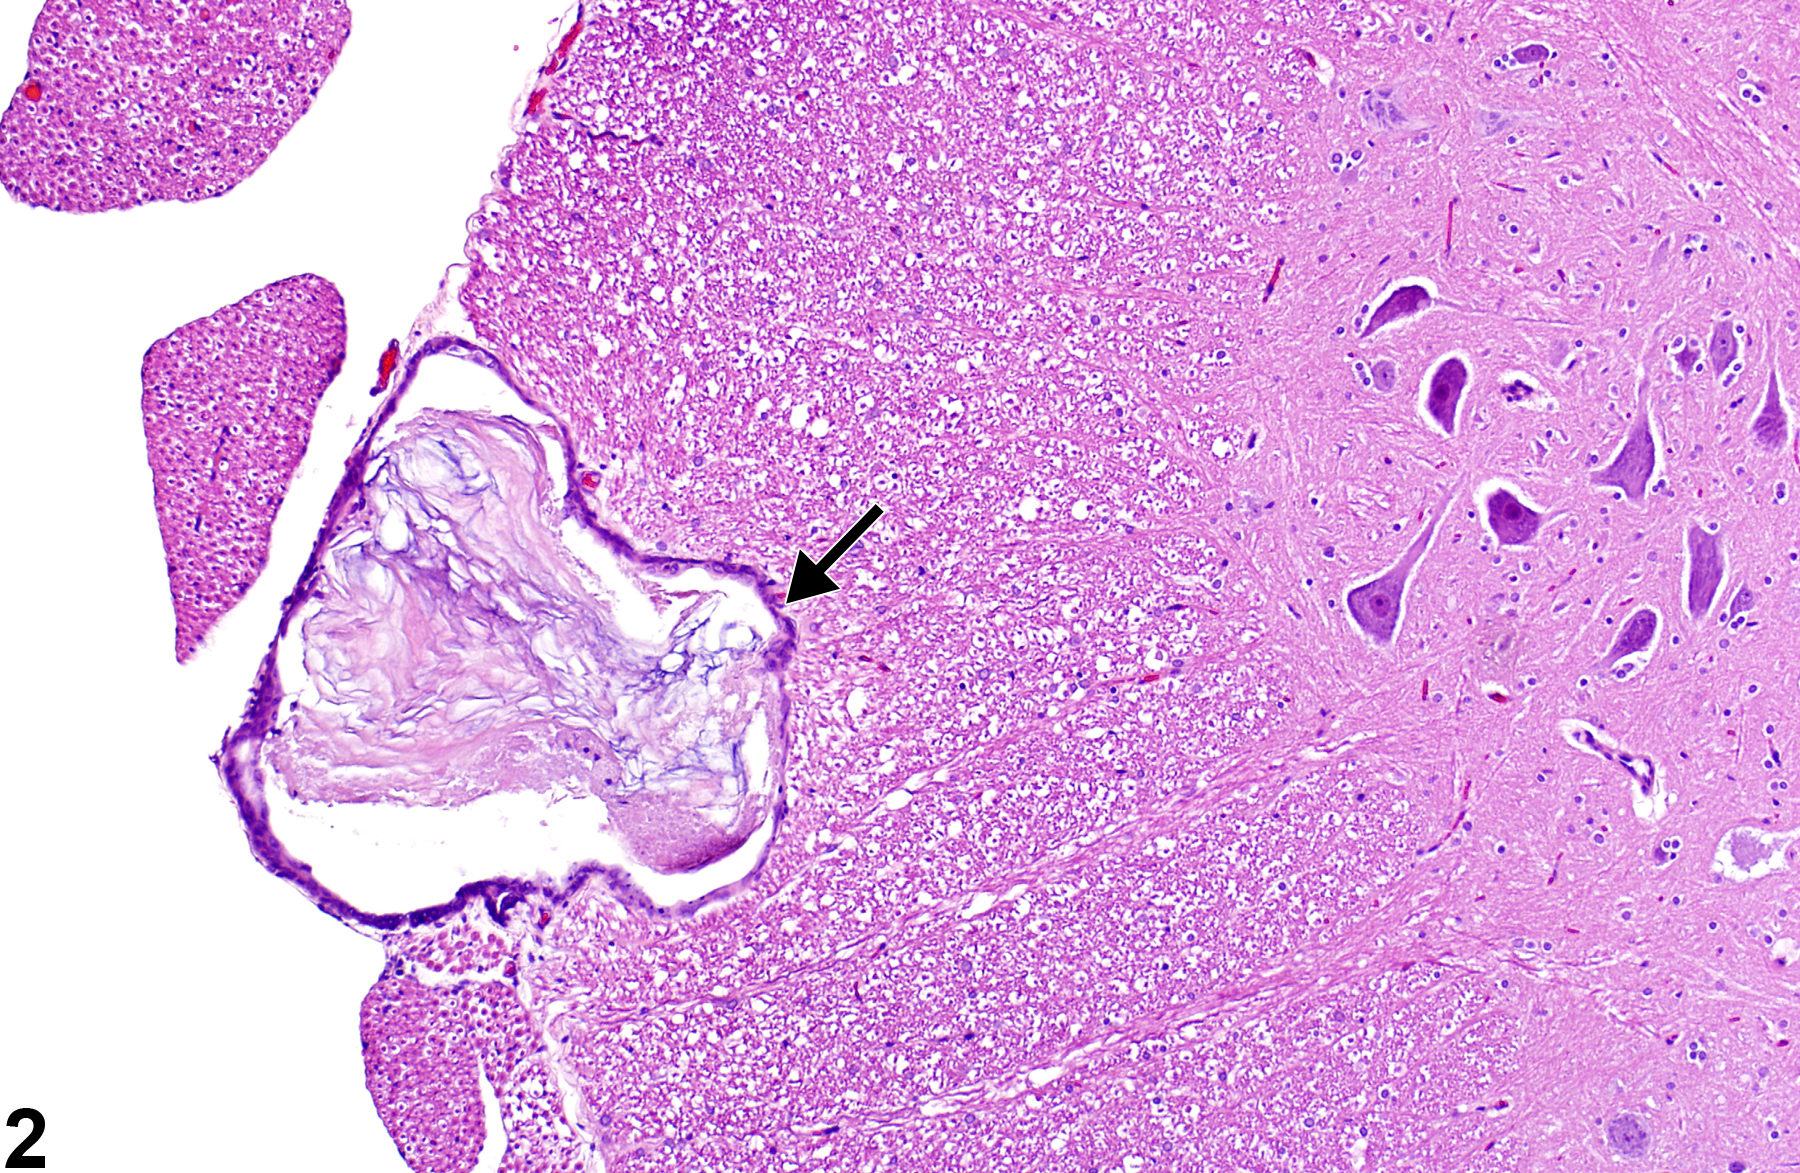 Image of epidermoid cyst in the spinal cord from a male Harlan Sprague-Dawley rat in a chronic study